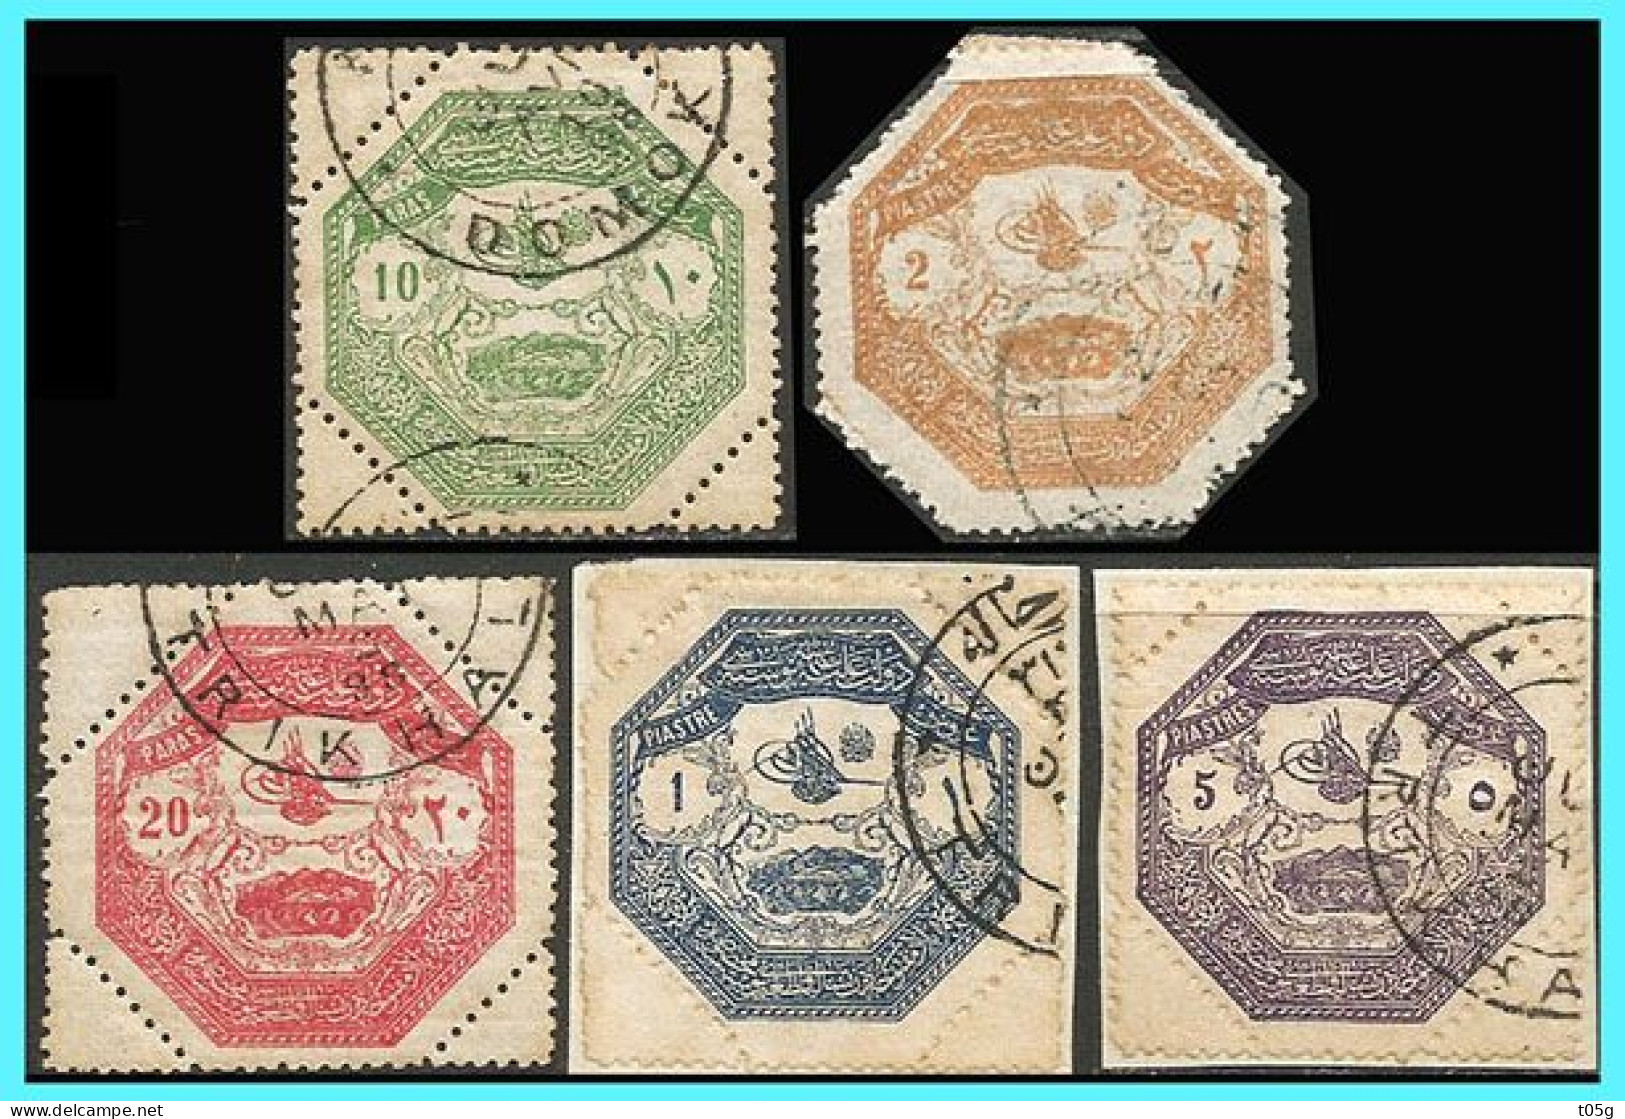 GREECE-GRECE-THESSALY- 1898:  Thessaly Compl. Set Used - Thessalie